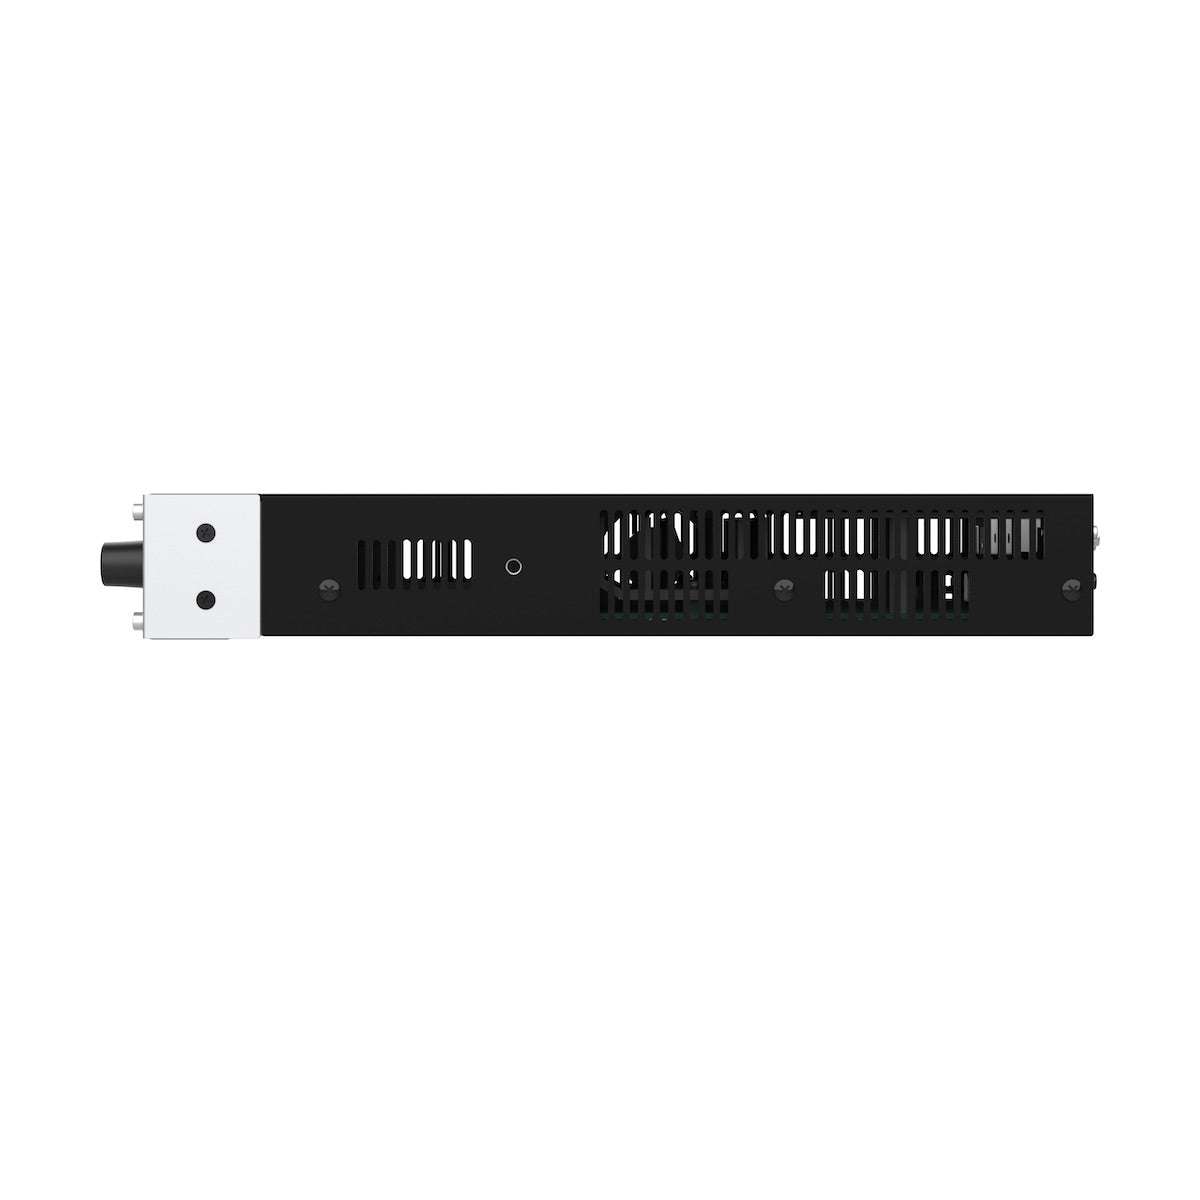 Roland VC-100UHD - 4K Video Scaler, Converter, and Streamer, right side